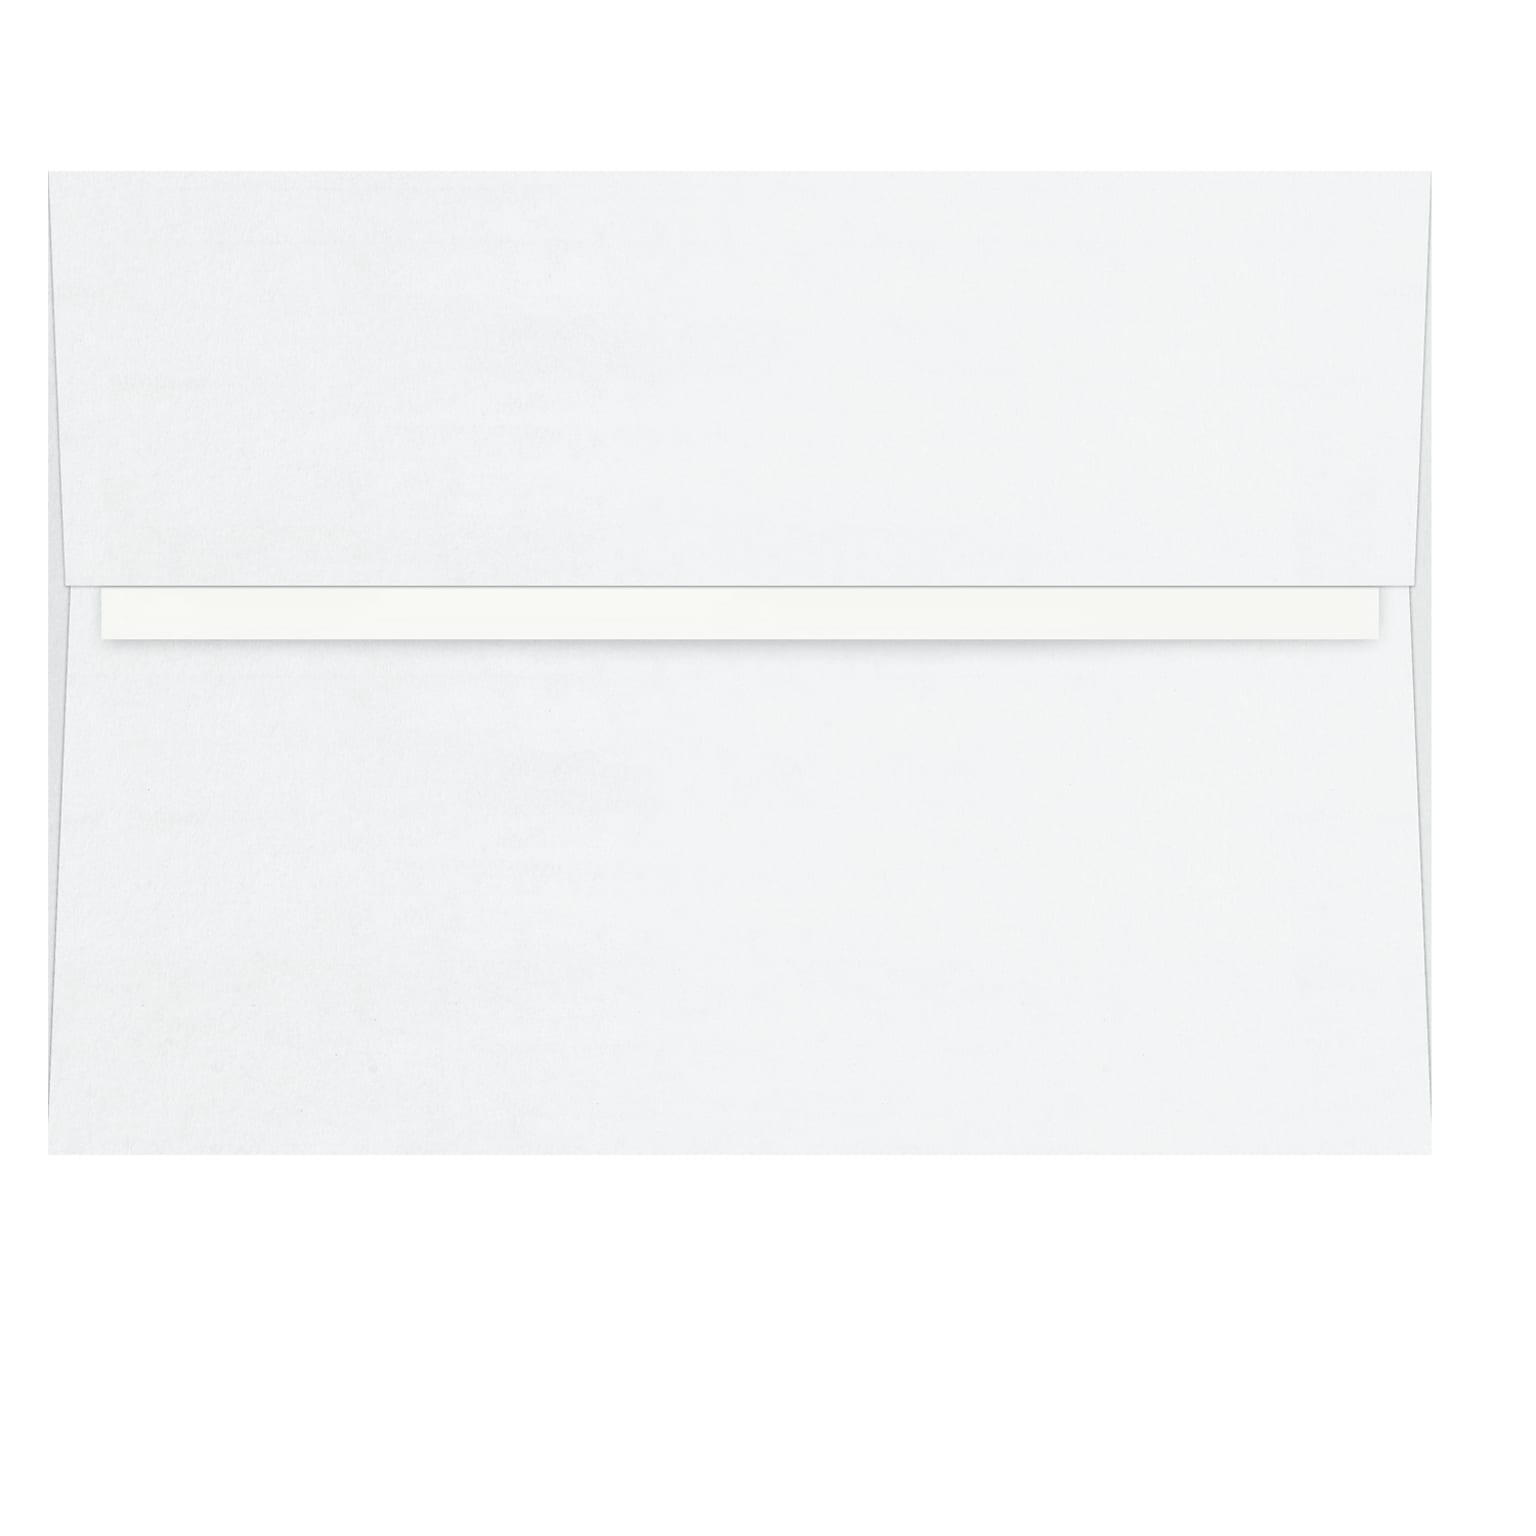 Red Lined White Printed Fastick Envelopes, 25 Per Pack